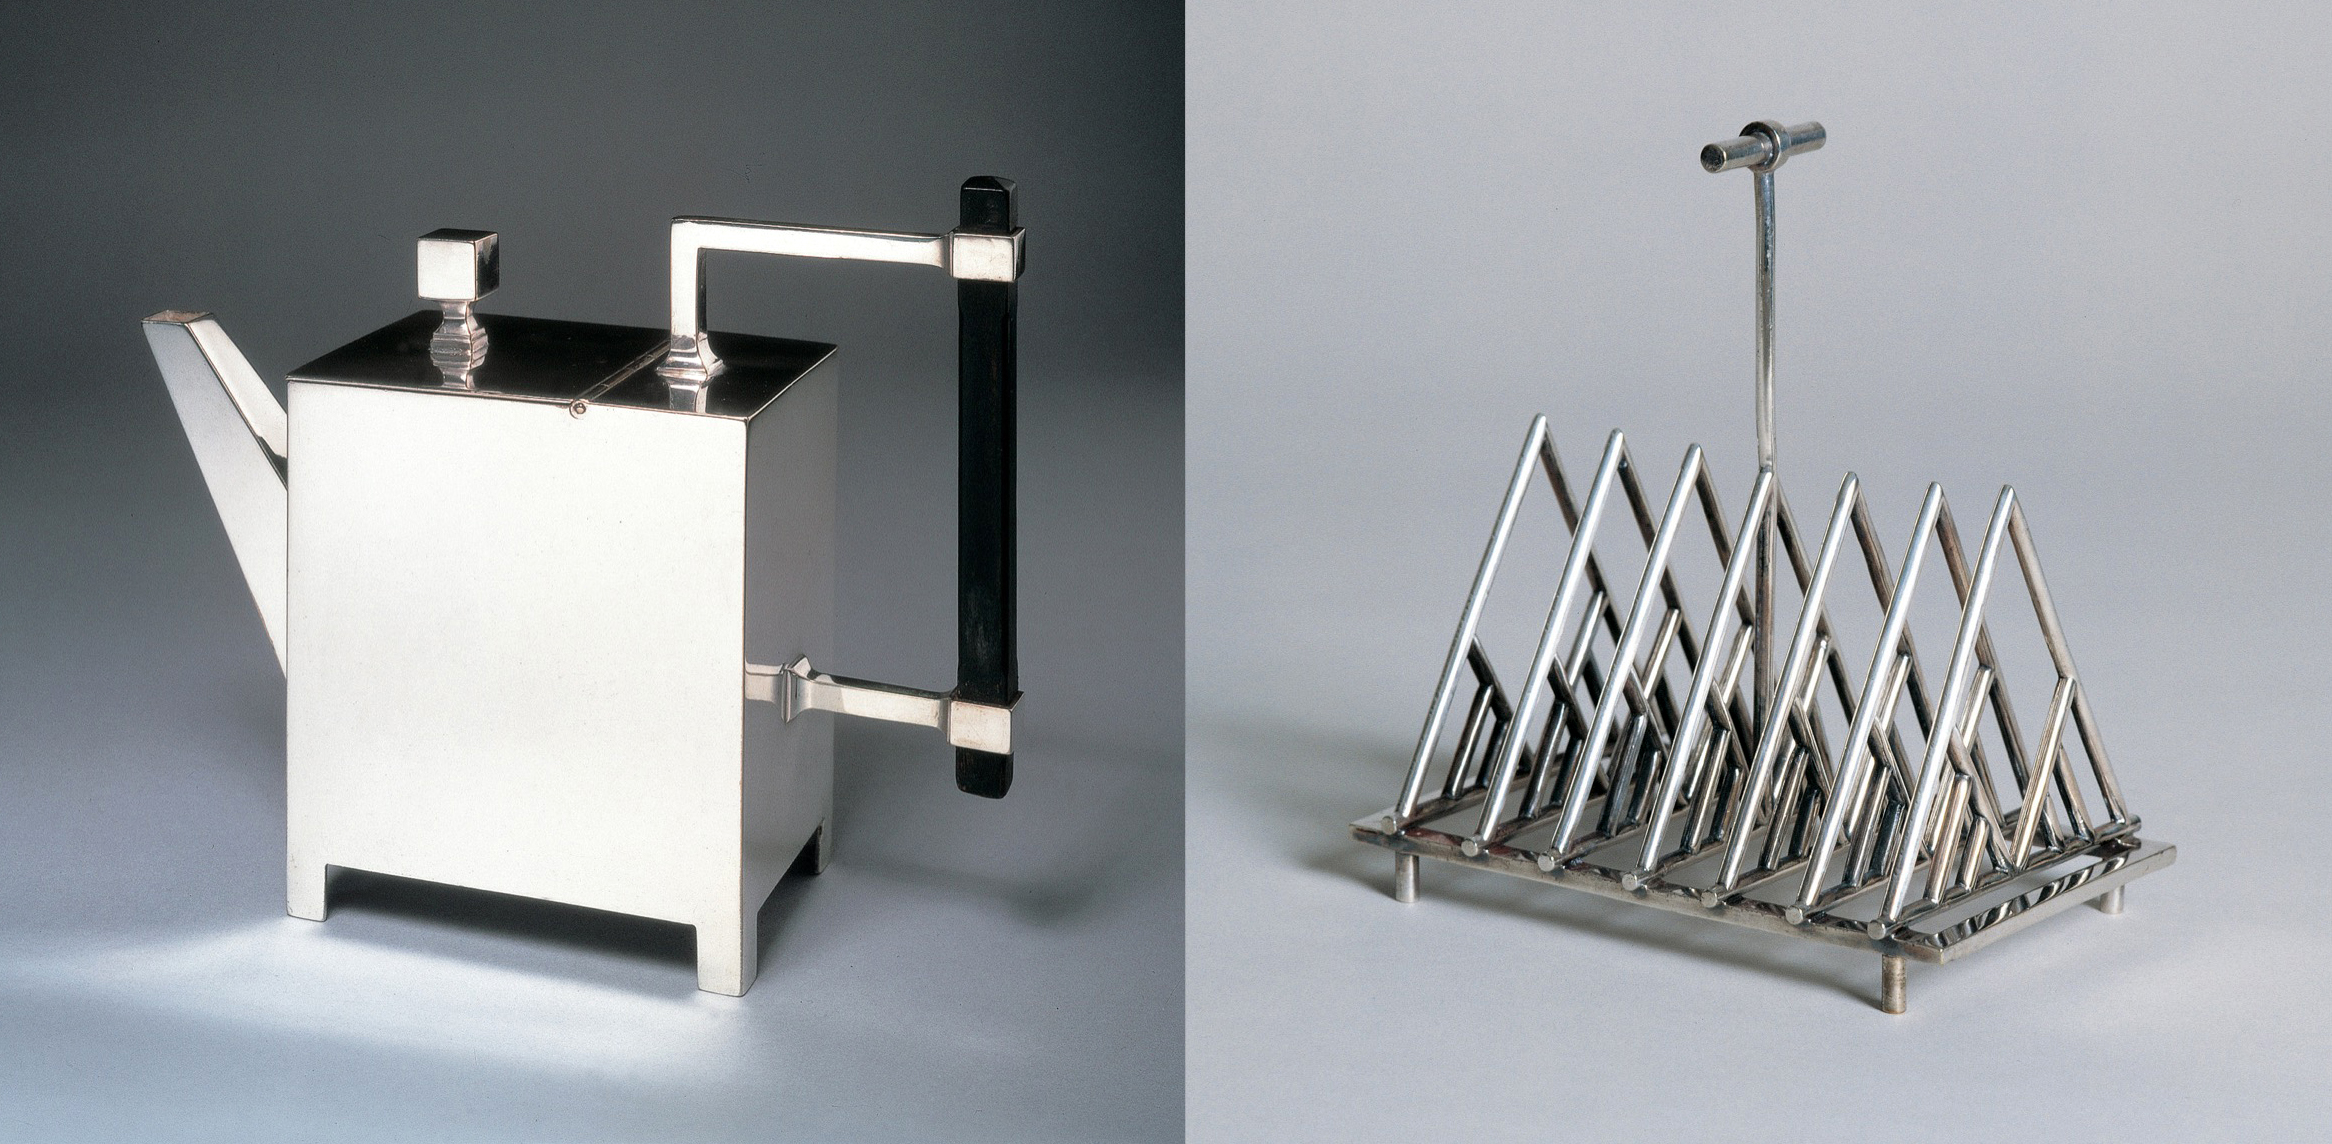 A silver-plated teapot with ebonized wood handle made by James Dixon & Sons, Sheffield, in about 1878, and a silver-plated toast rack by James Dixon & Sons about a year later. Photos by The British Museum and Michael Whiteway respectively